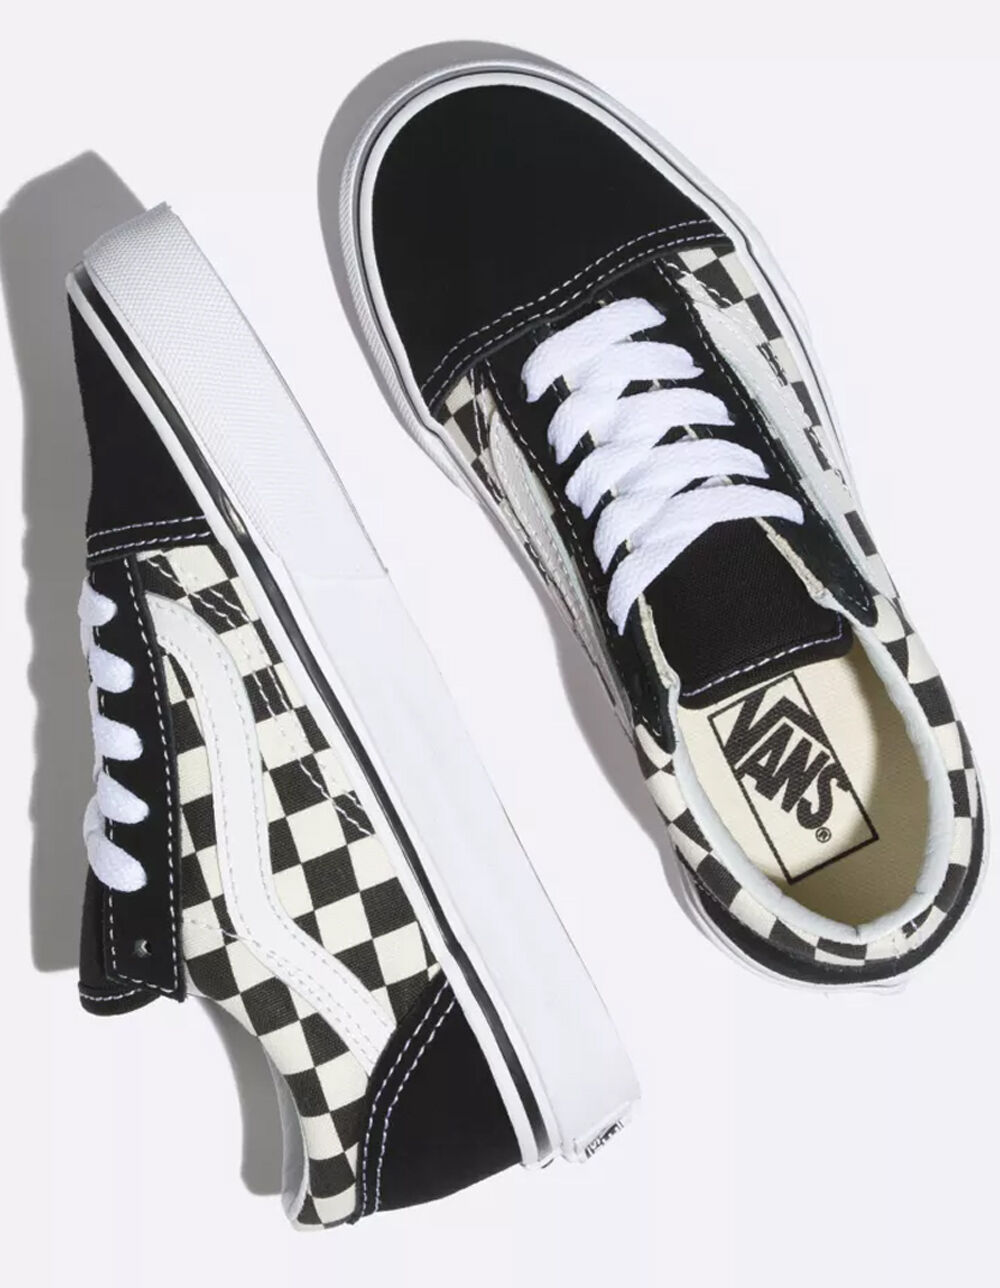  Vans Old Skool (Primary Checkered) Black/White Size 8 |  Fashion Sneakers